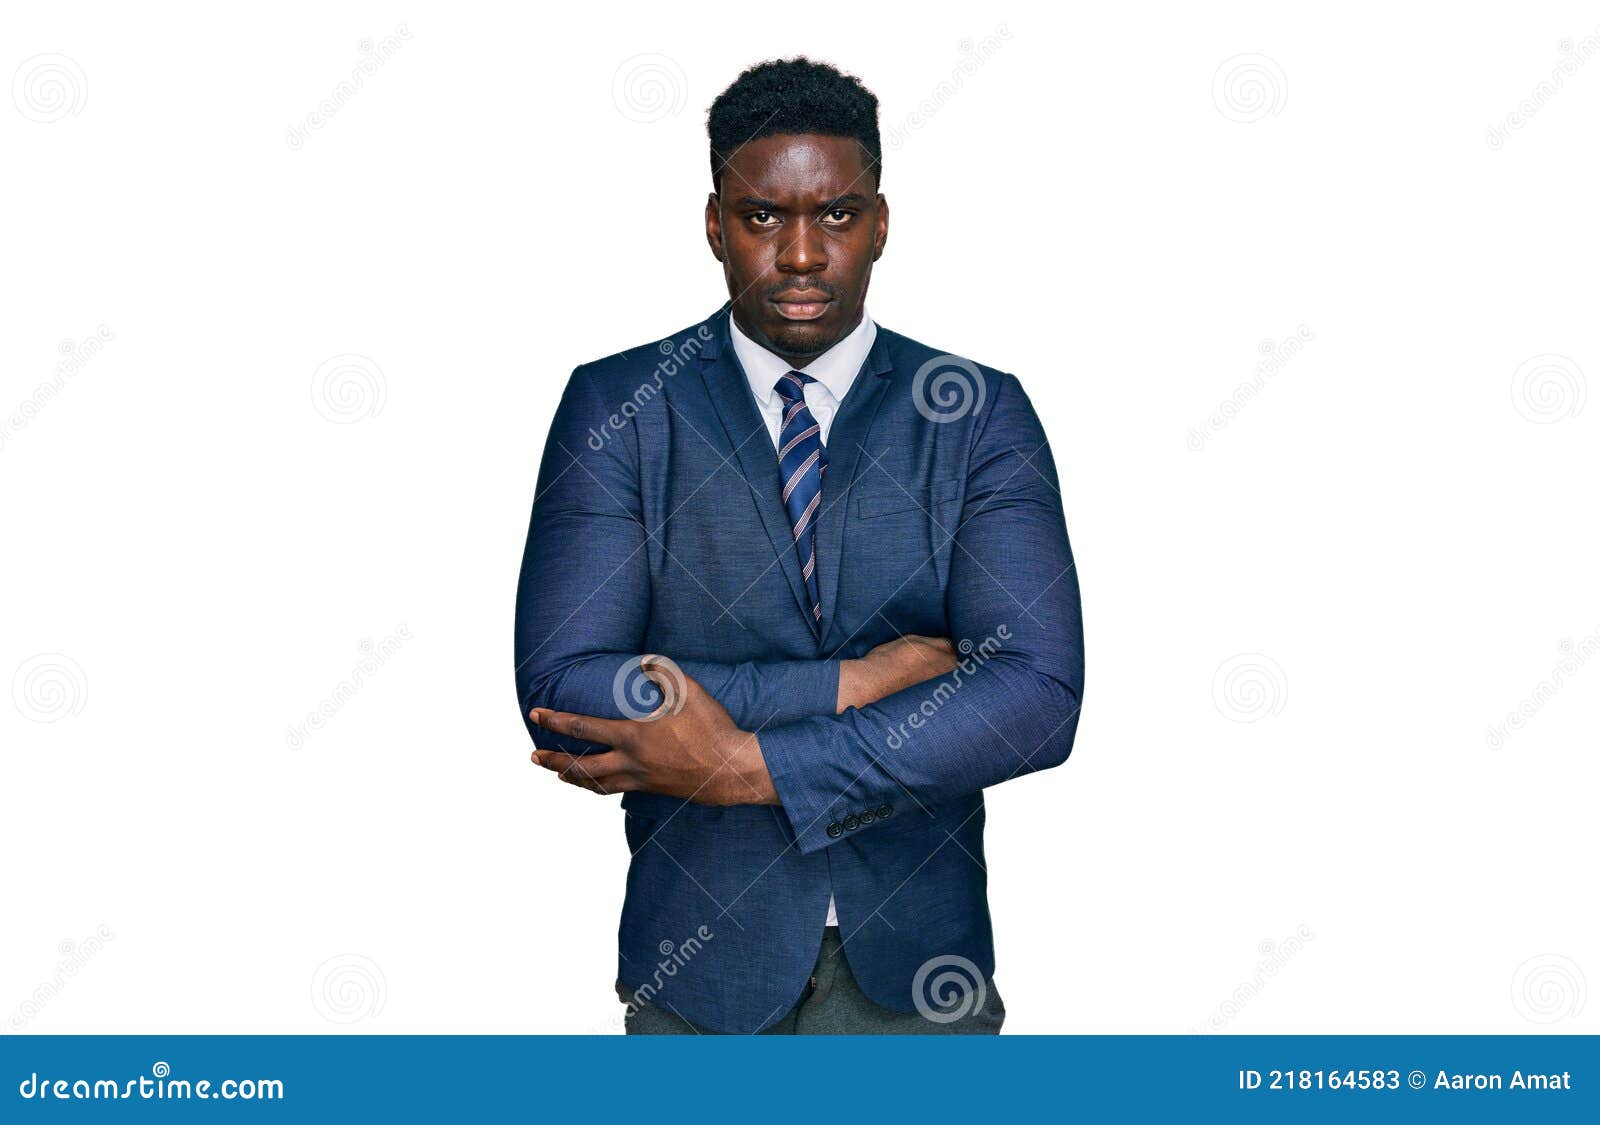 Handsome Business Black Man Wearing Business Suit and Tie Skeptic and  Nervous, Disapproving Expression on Face with Crossed Arms Stock Image -  Image of disbelief, clothes: 218164583